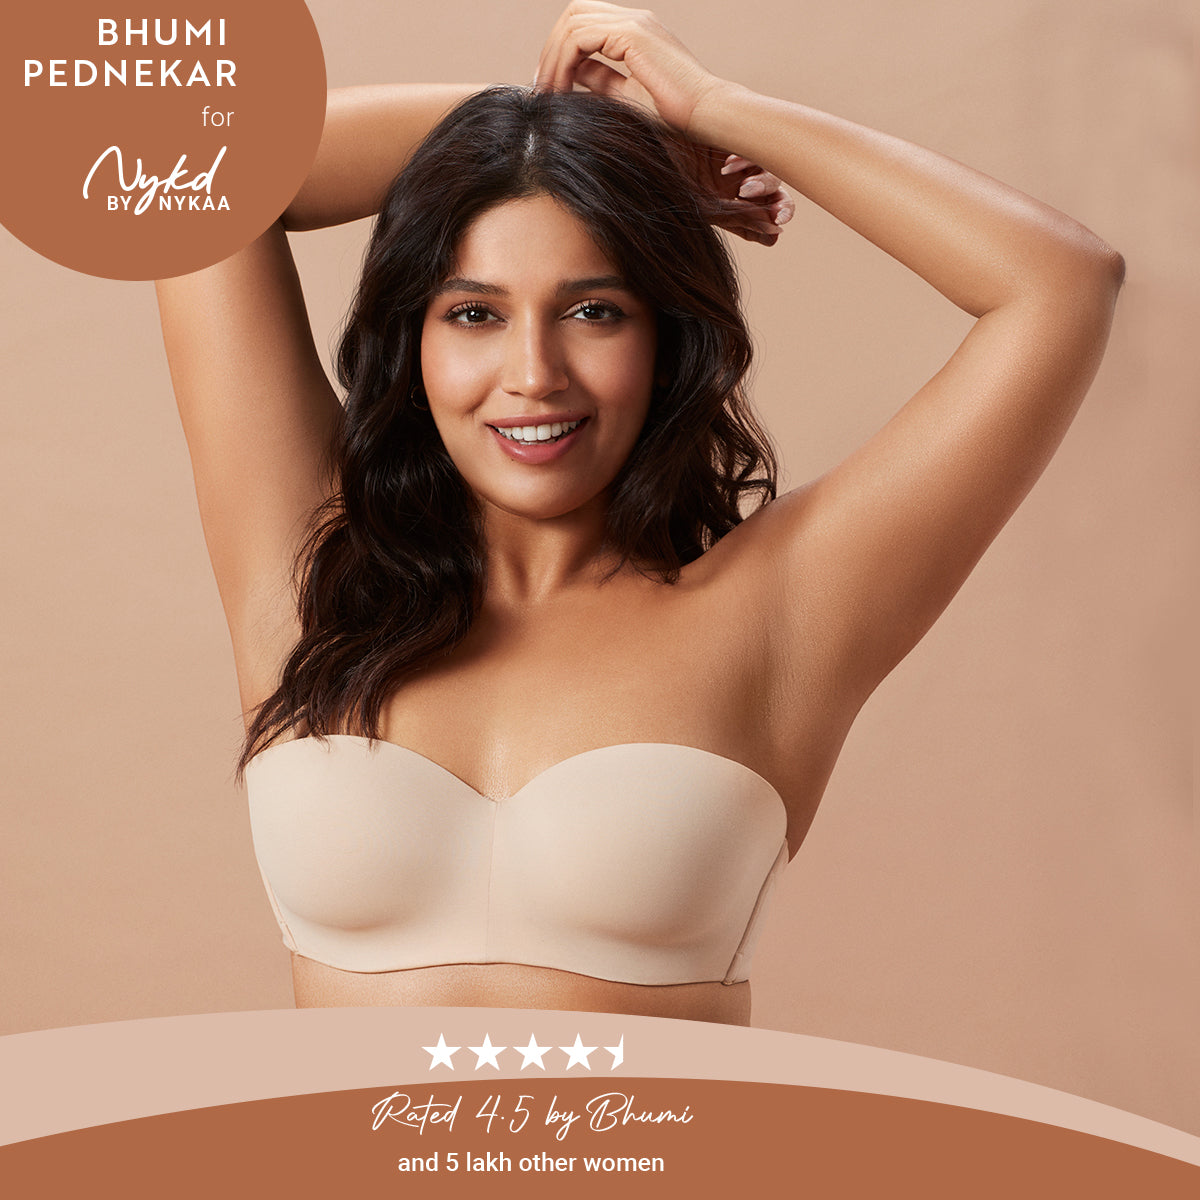 pepper strapless bra review - Buy pepper strapless bra review with